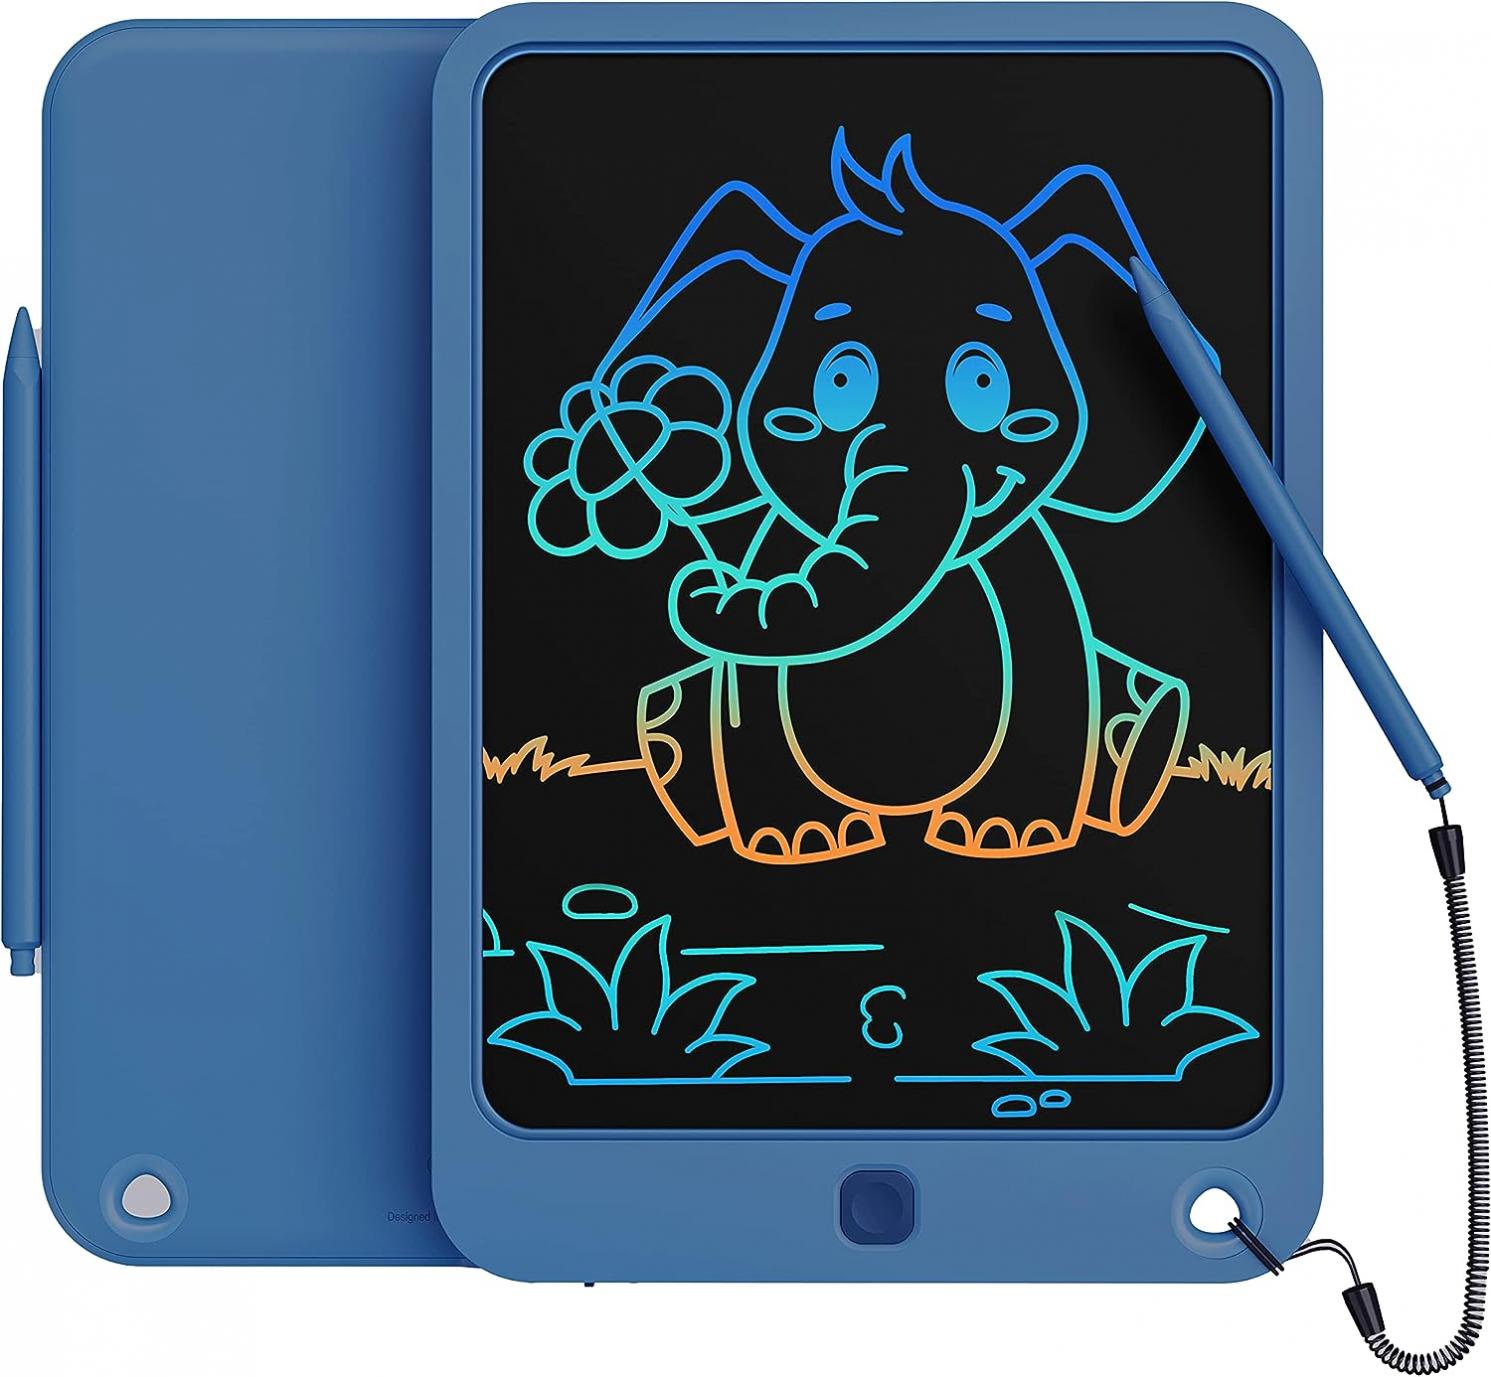 LCD Writing Tablet 10 Inch, Toys for 3 4 5 6 7 8 9 10 Year Old Boys Girls, Colorful Doodle Board Drawing Tablet, Gift for Boys Toddlers Age 3-12 Years, Memo Board, Drawing Pads with Lanyard(Navy)